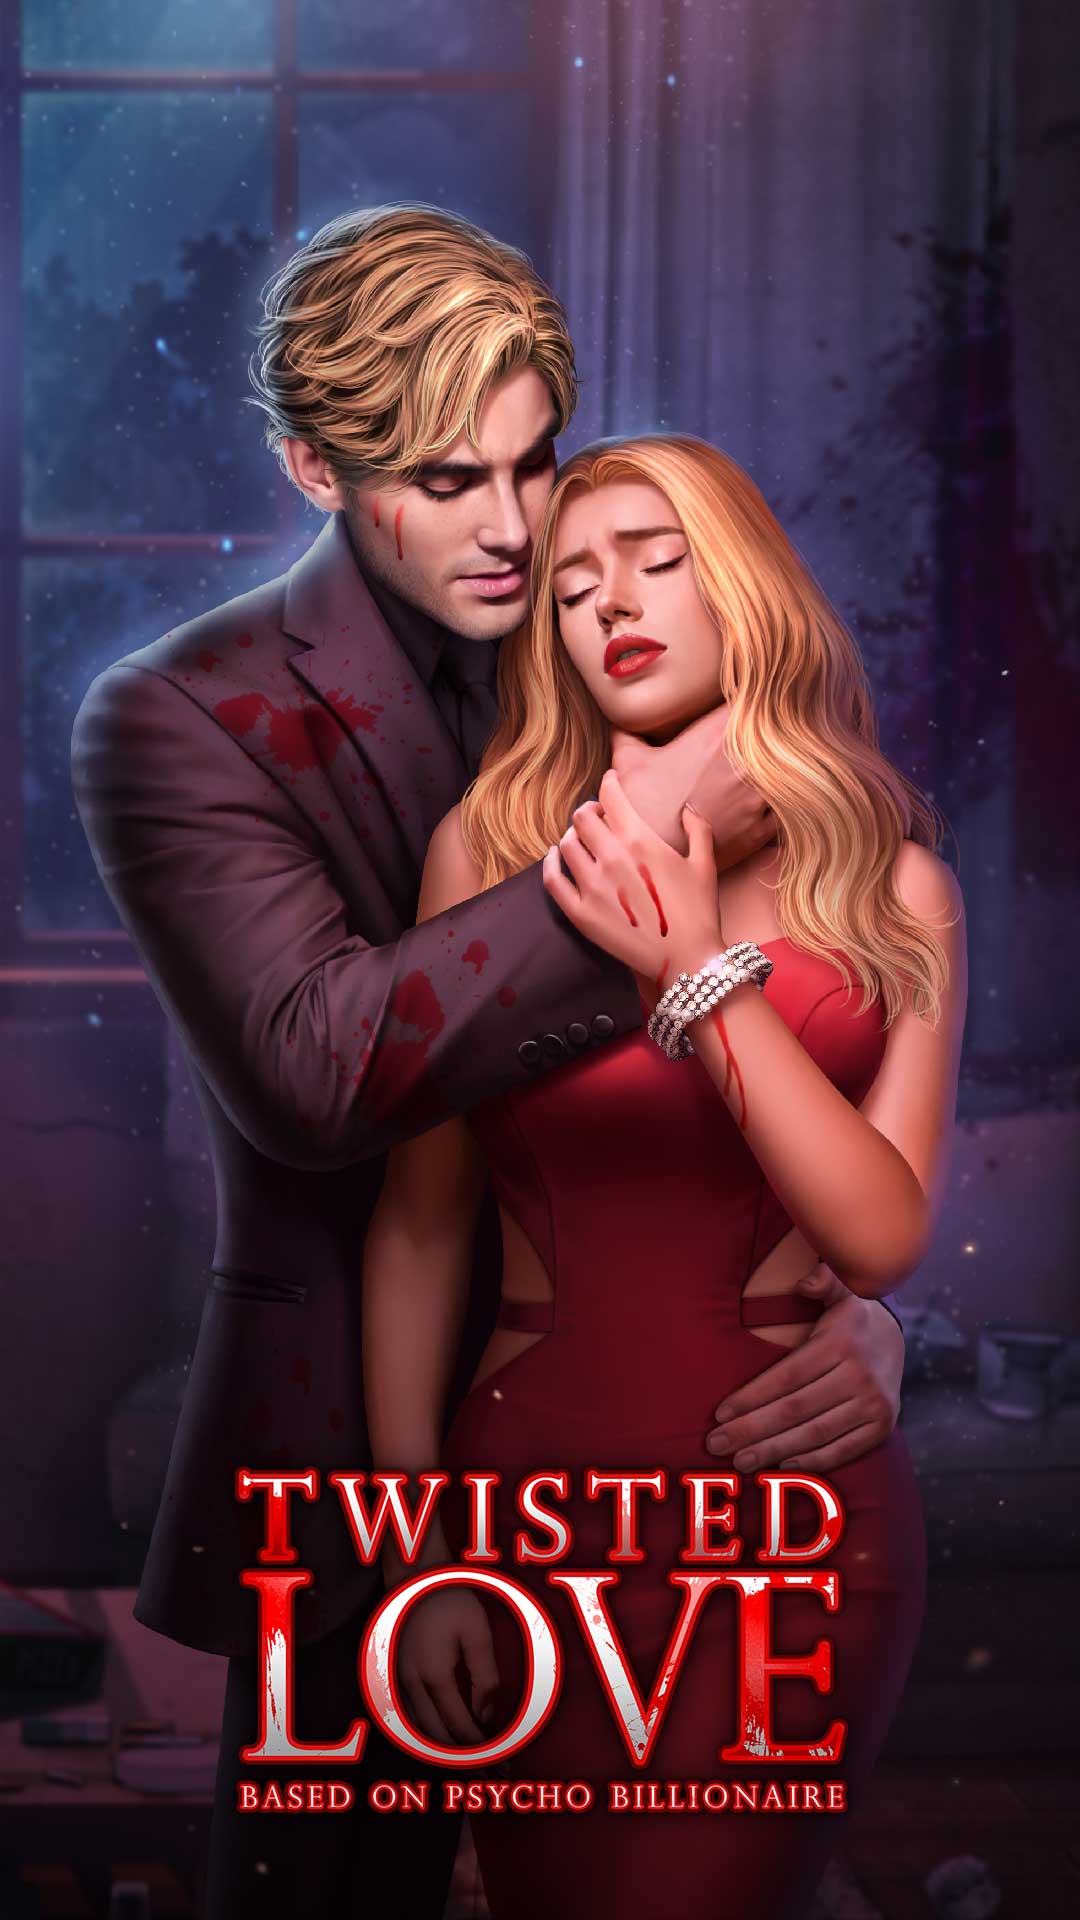 Twisted Love was so easy to read & digest #twistedlove #avachen